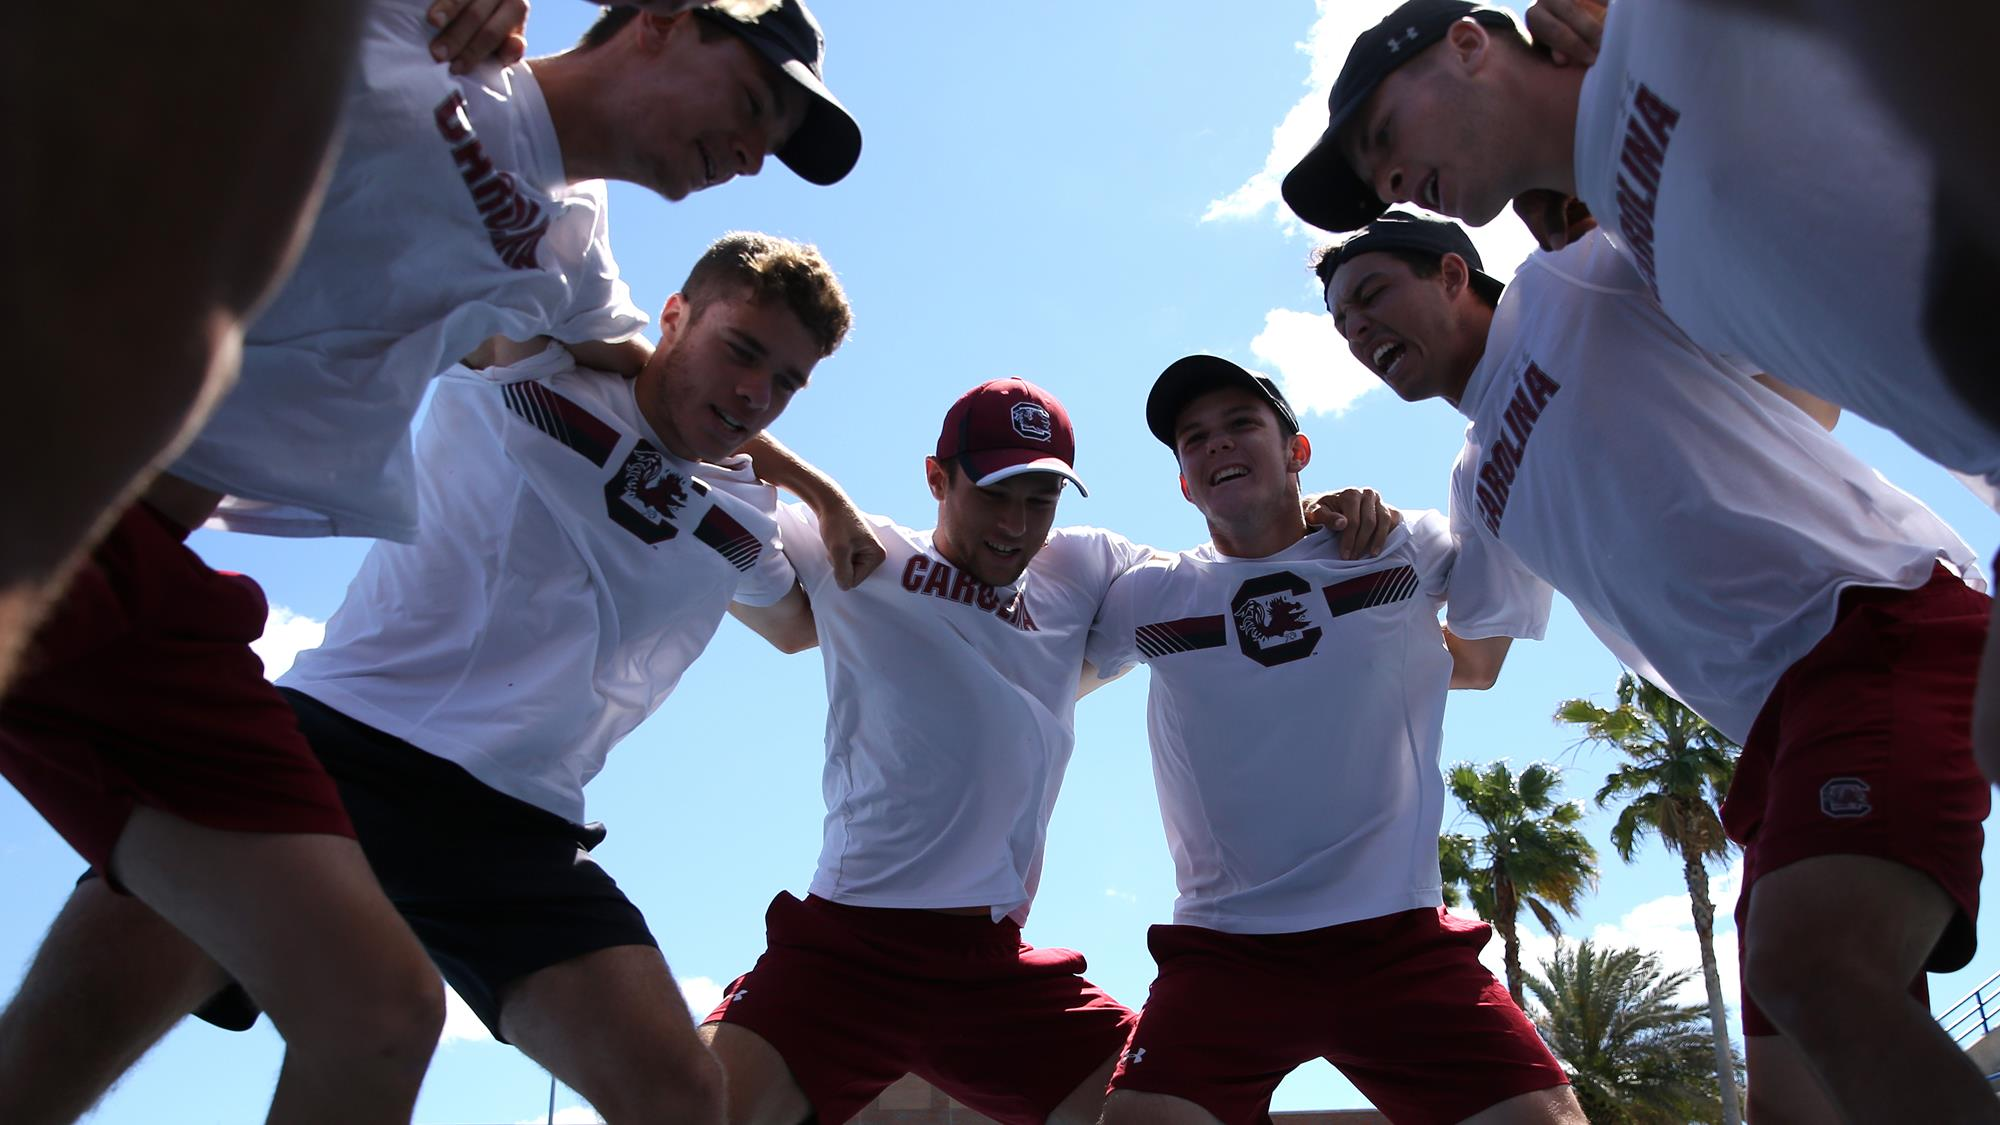 Gamecocks Up to No. 17 in ITA Team Rankings